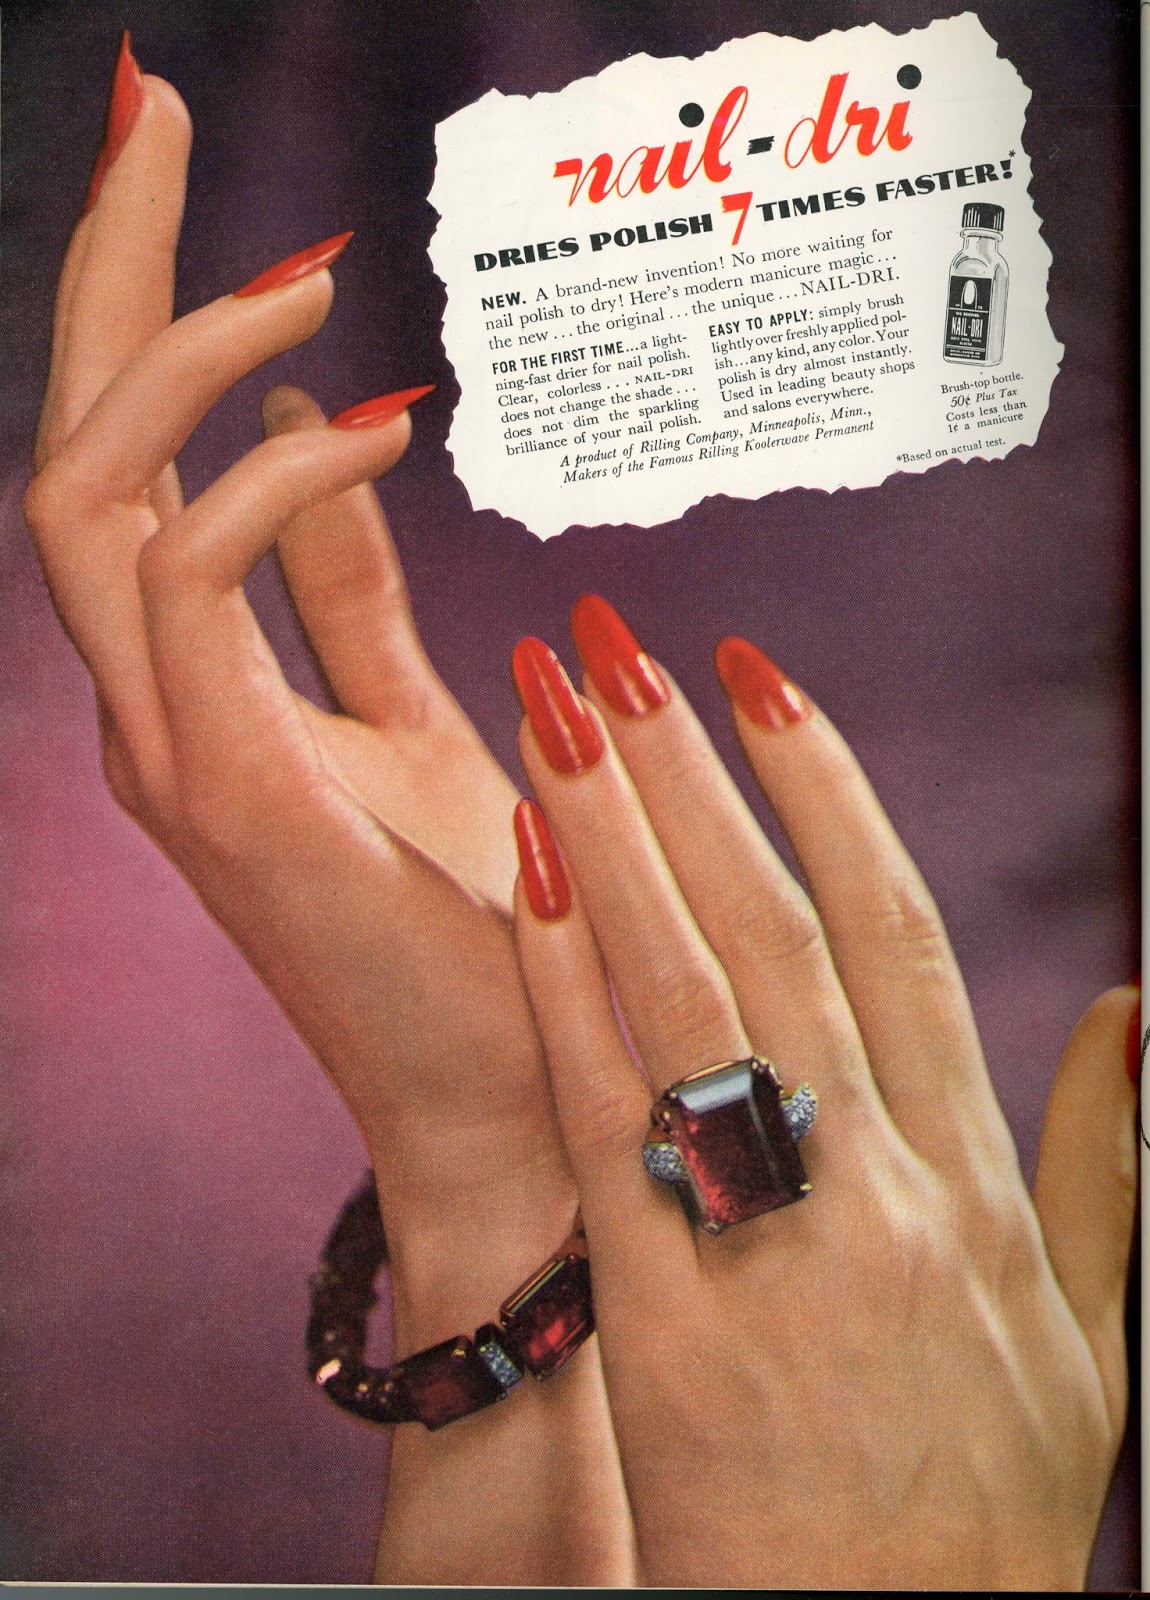 Nails: The Story of the Modern Manicure - Book Review - Nailed It | The Nail  Art Blog